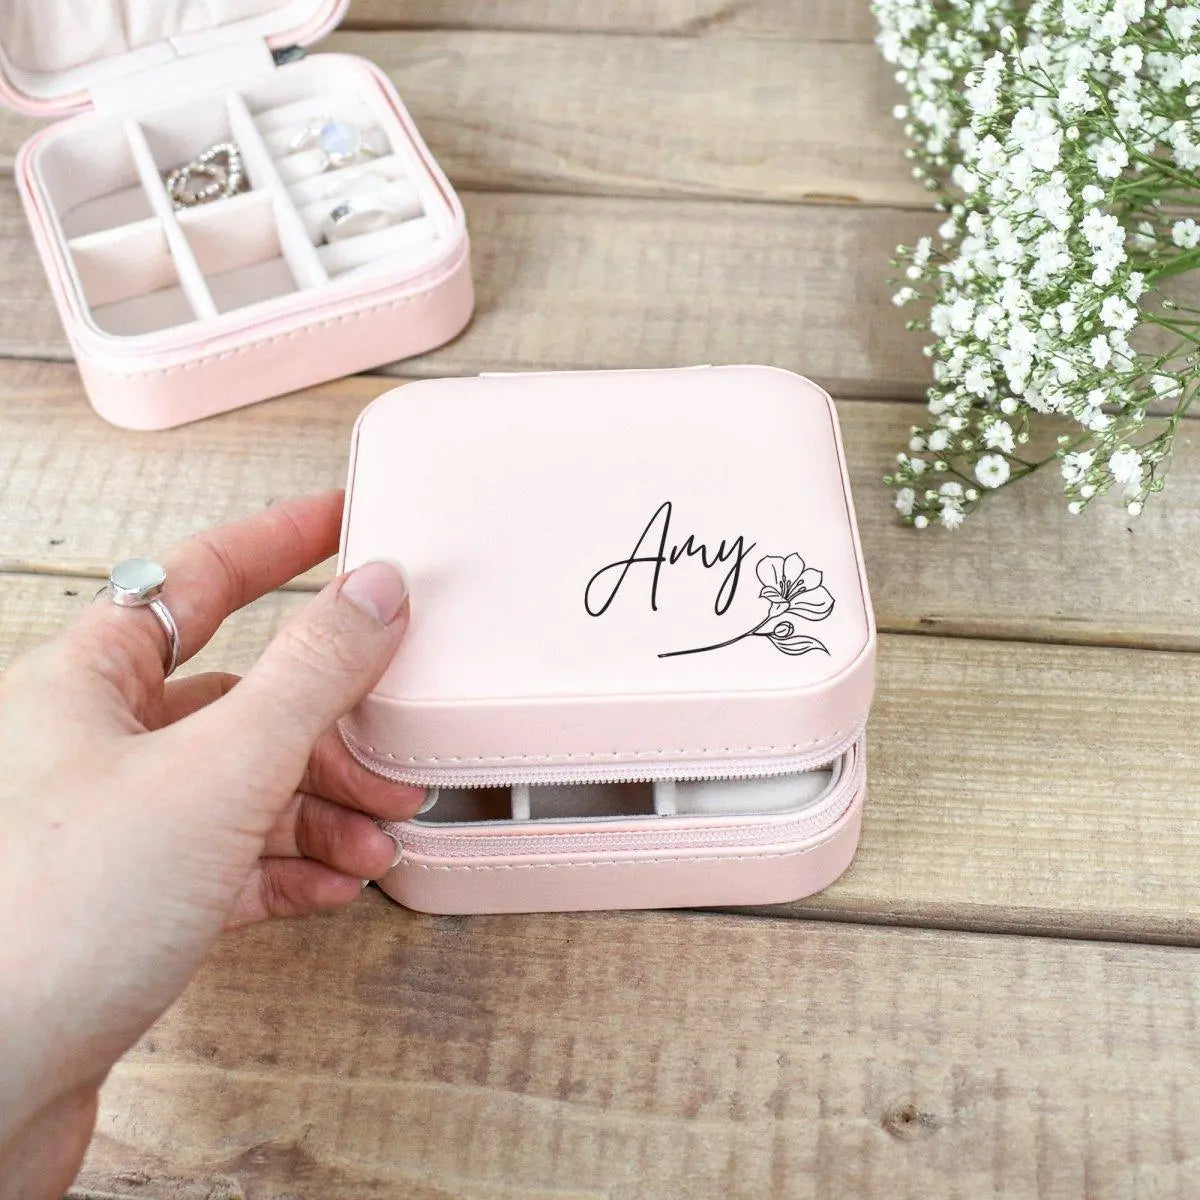 Personalised Travel Jewellery Case, Mini Jewellery Box, Mothers Day Gift, Bridesmaid Gift, Jewellery Storage, Beauty Organiser, Gift for Her - Amy Lucy